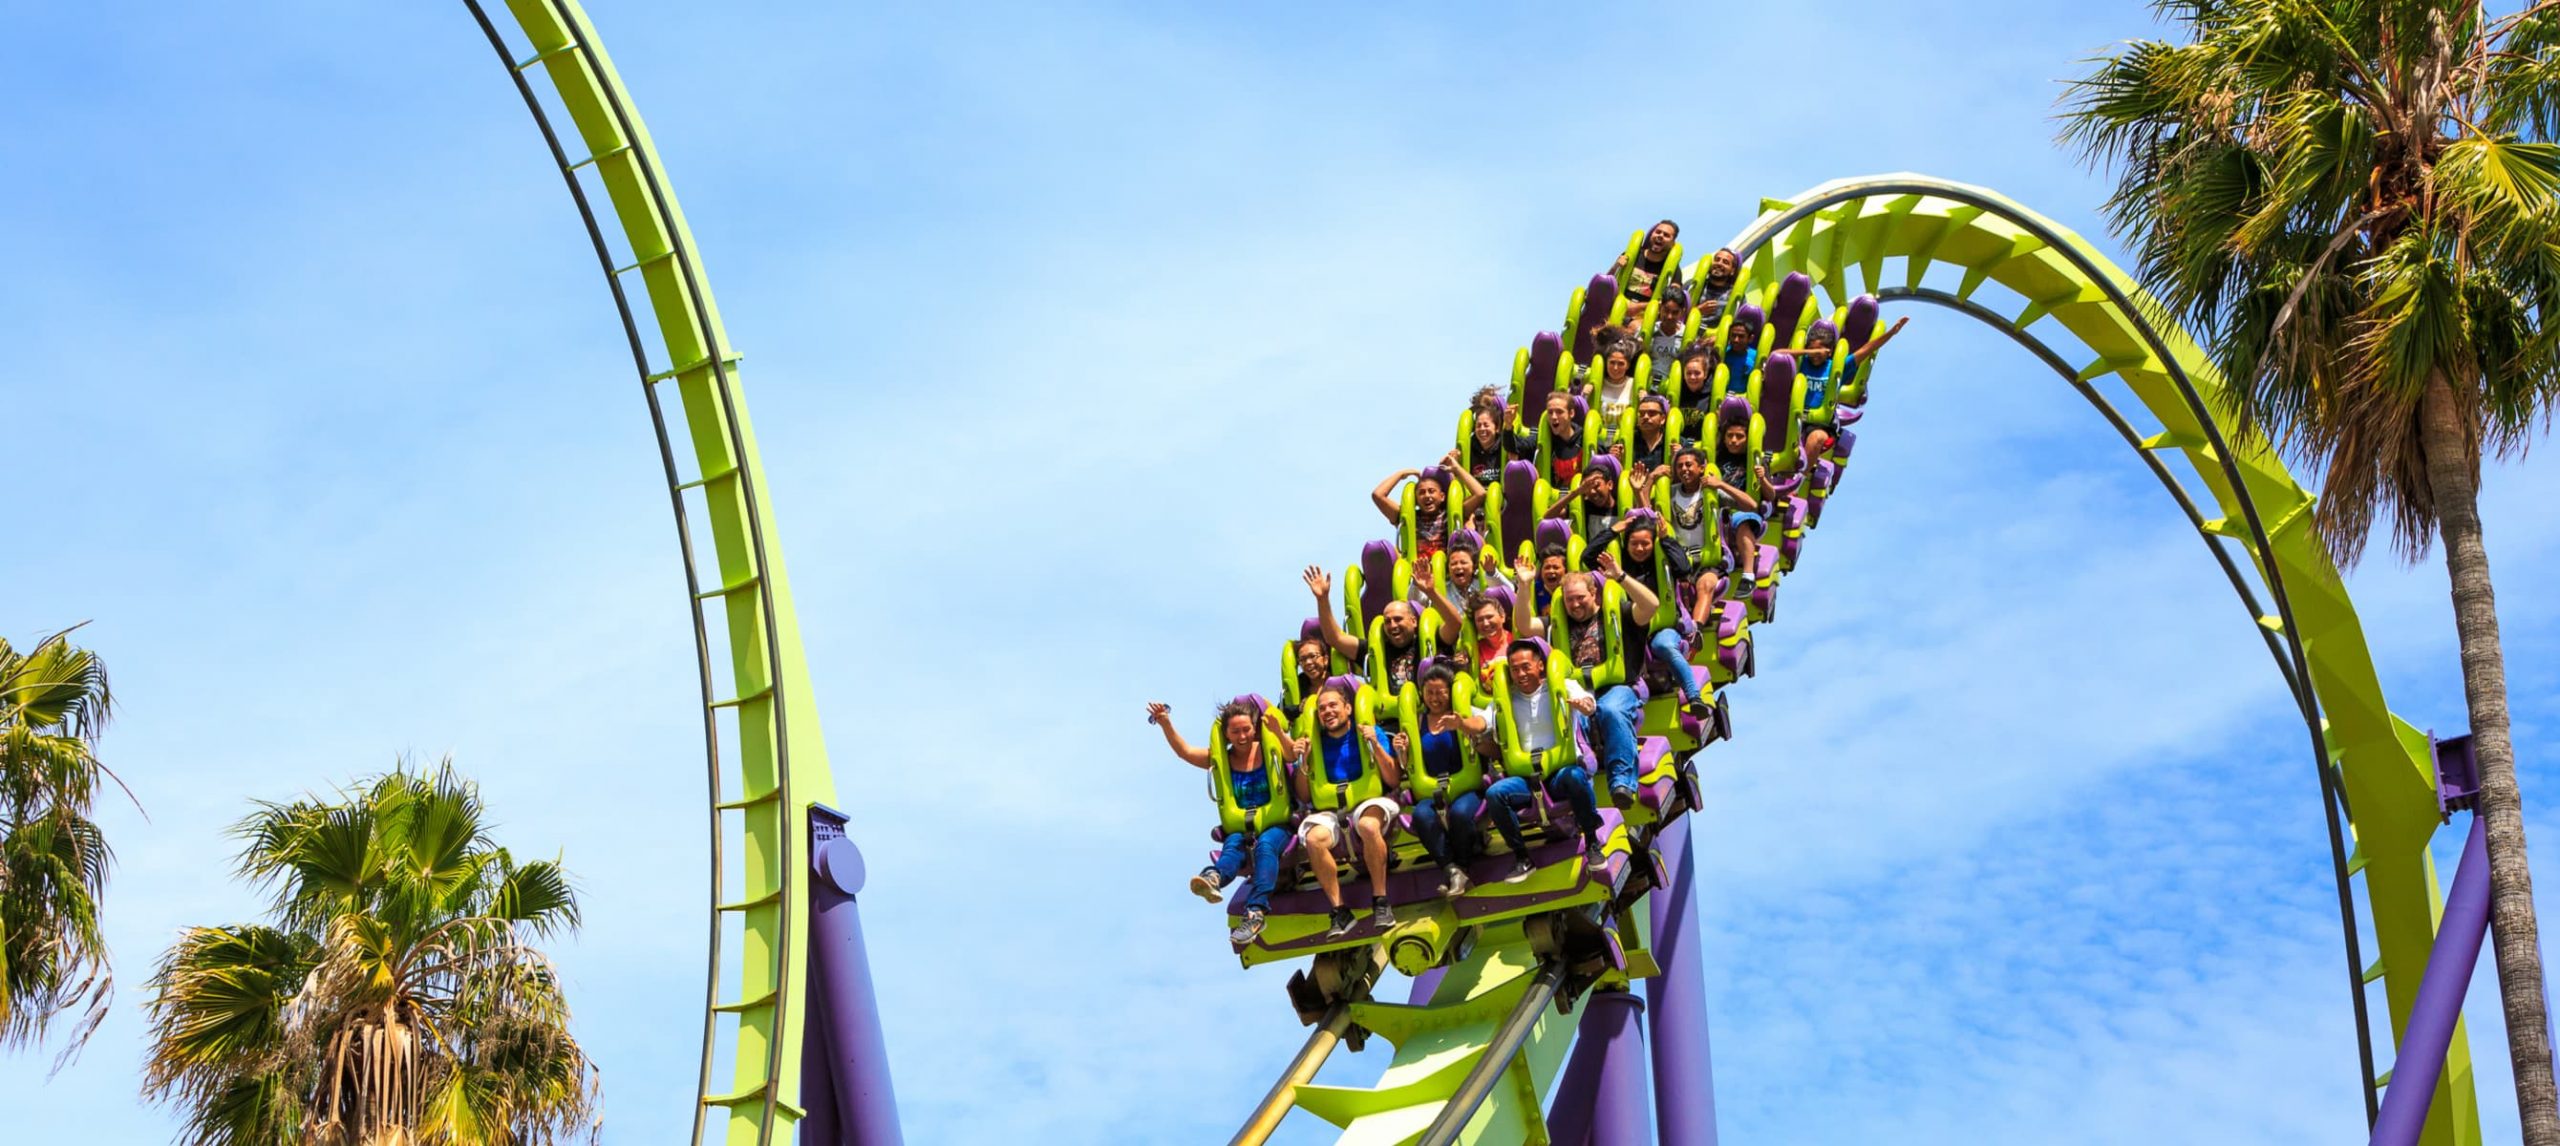 Roller coaster Medusa is steel, 3,937 feet high, the longest and highest coaster in Northern California at Six Flags Discovery Kingdom.